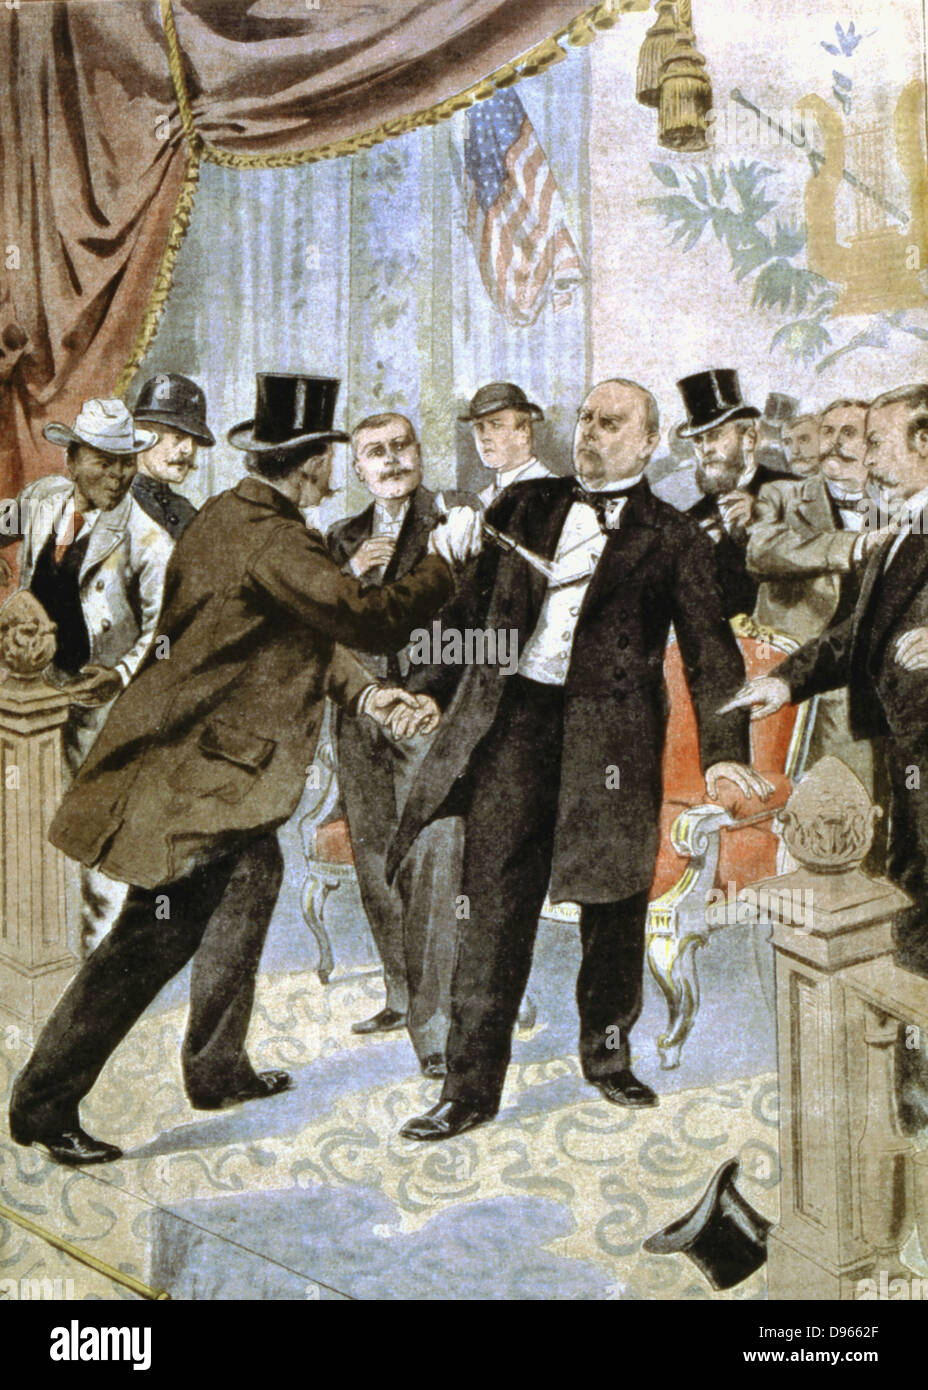 Assassination of William McKinley (1843-1901), 25th president of USA from 1896, shot by the anarchist Leon Czolgosz, Buffalo, N.Y., and died 8 days after. From 'Le Petit Journal', Paris, 22 September 1901. Stock Photo